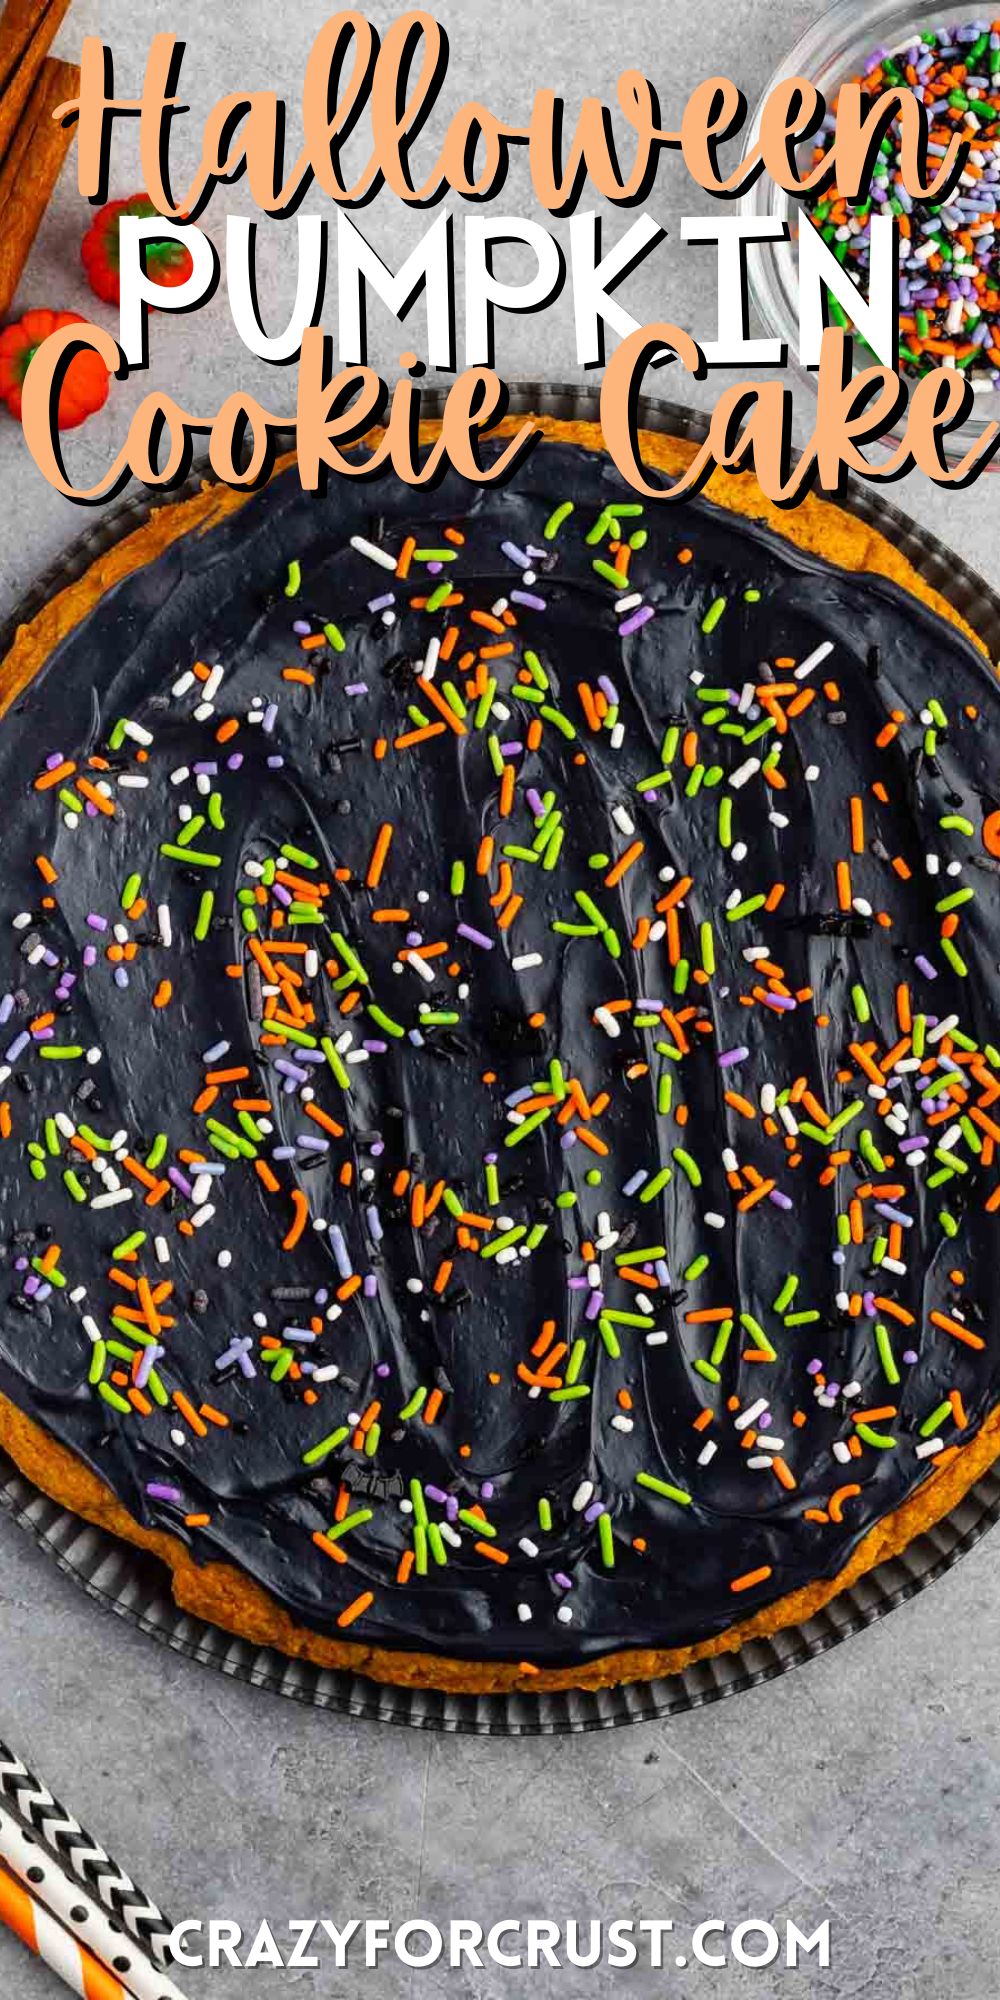 halloween pumpkin cookie cake with black frosting and sprinkles on top with words on the image.